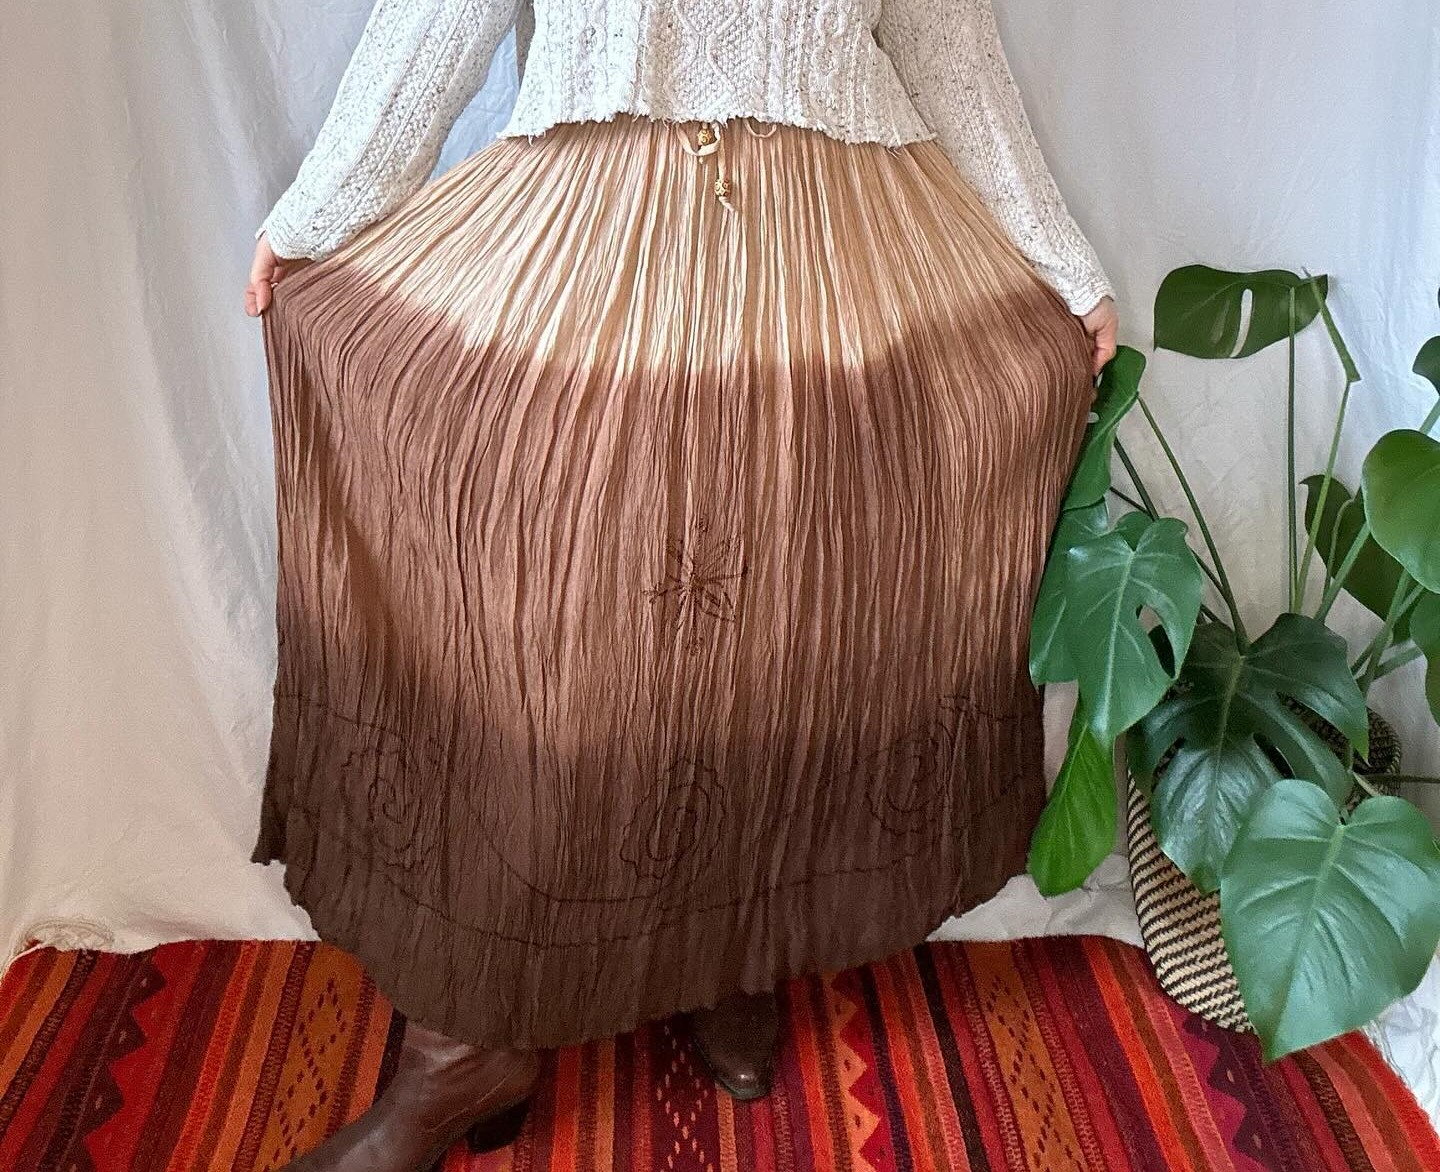 A woman shows off her brown broomstick skirt